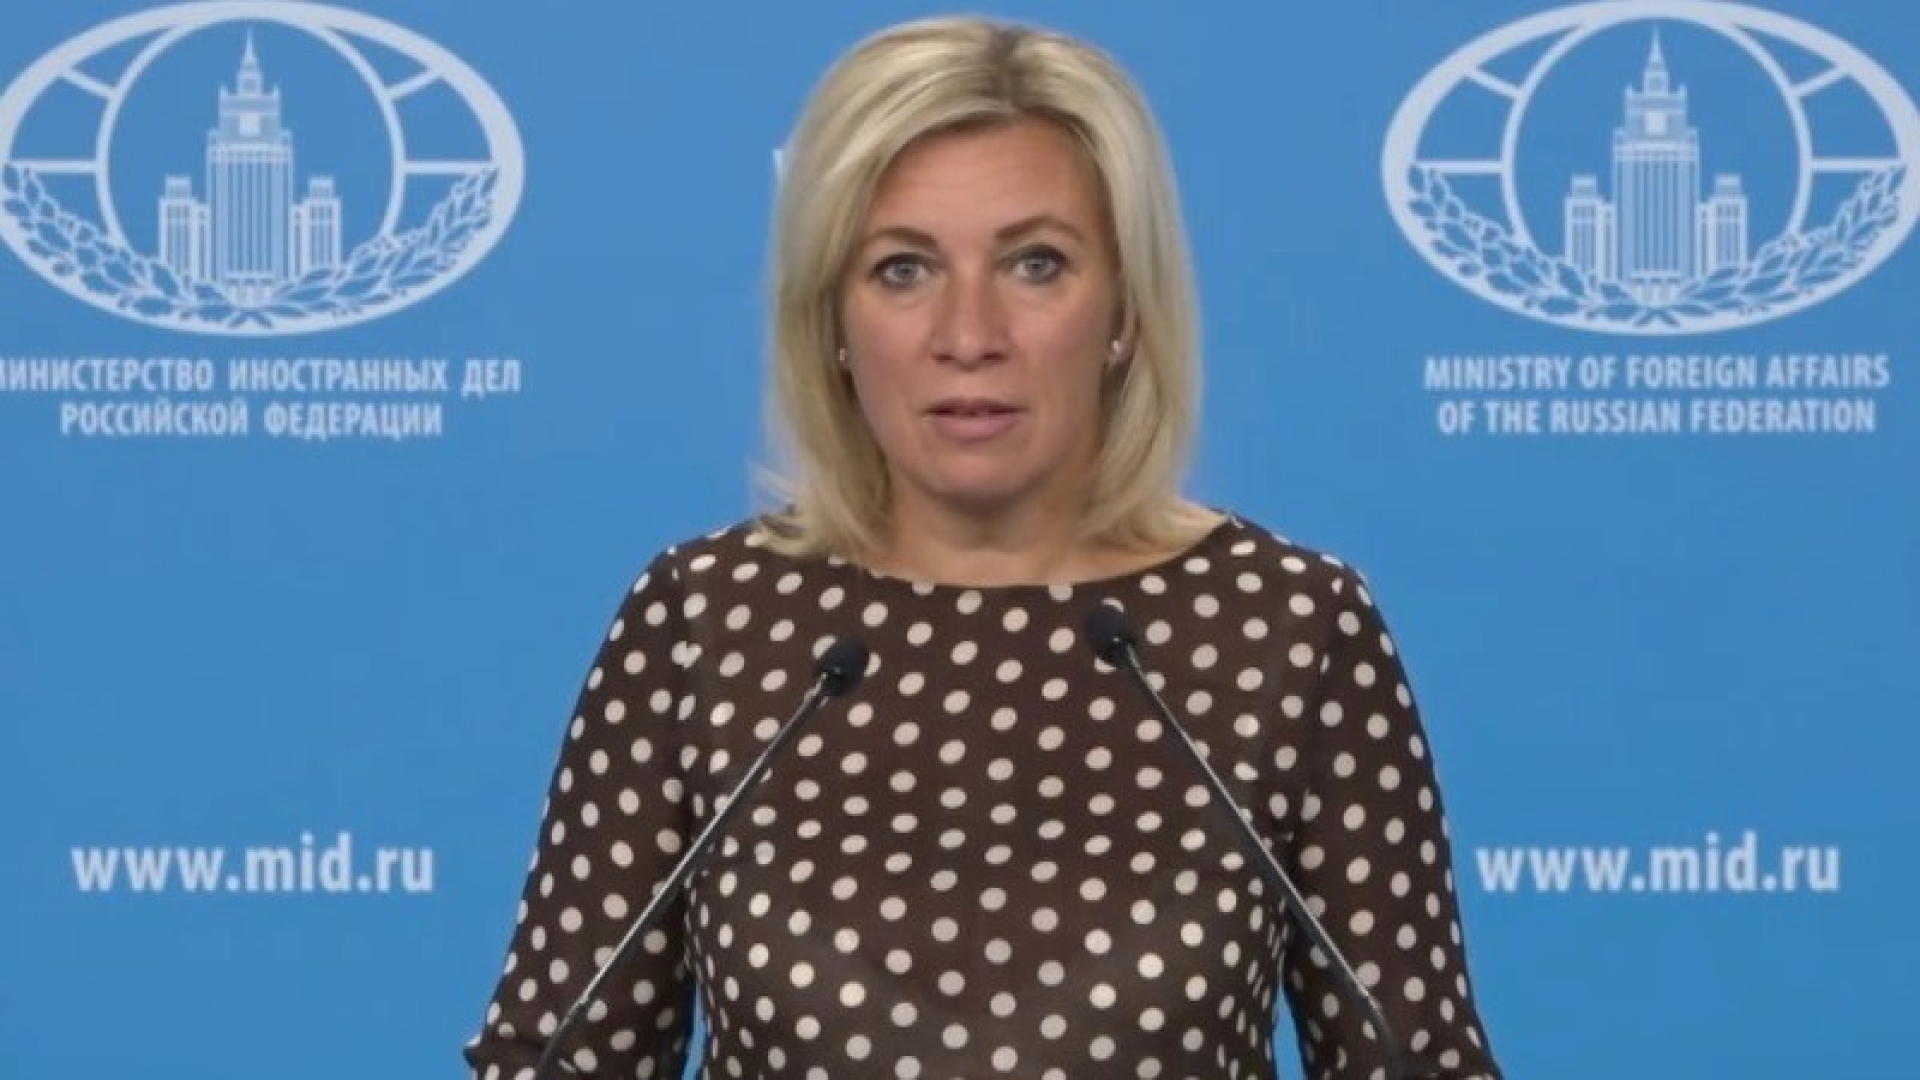 Maria Zakharova: Russia's accusations of fascism are a direct insult to the country and people